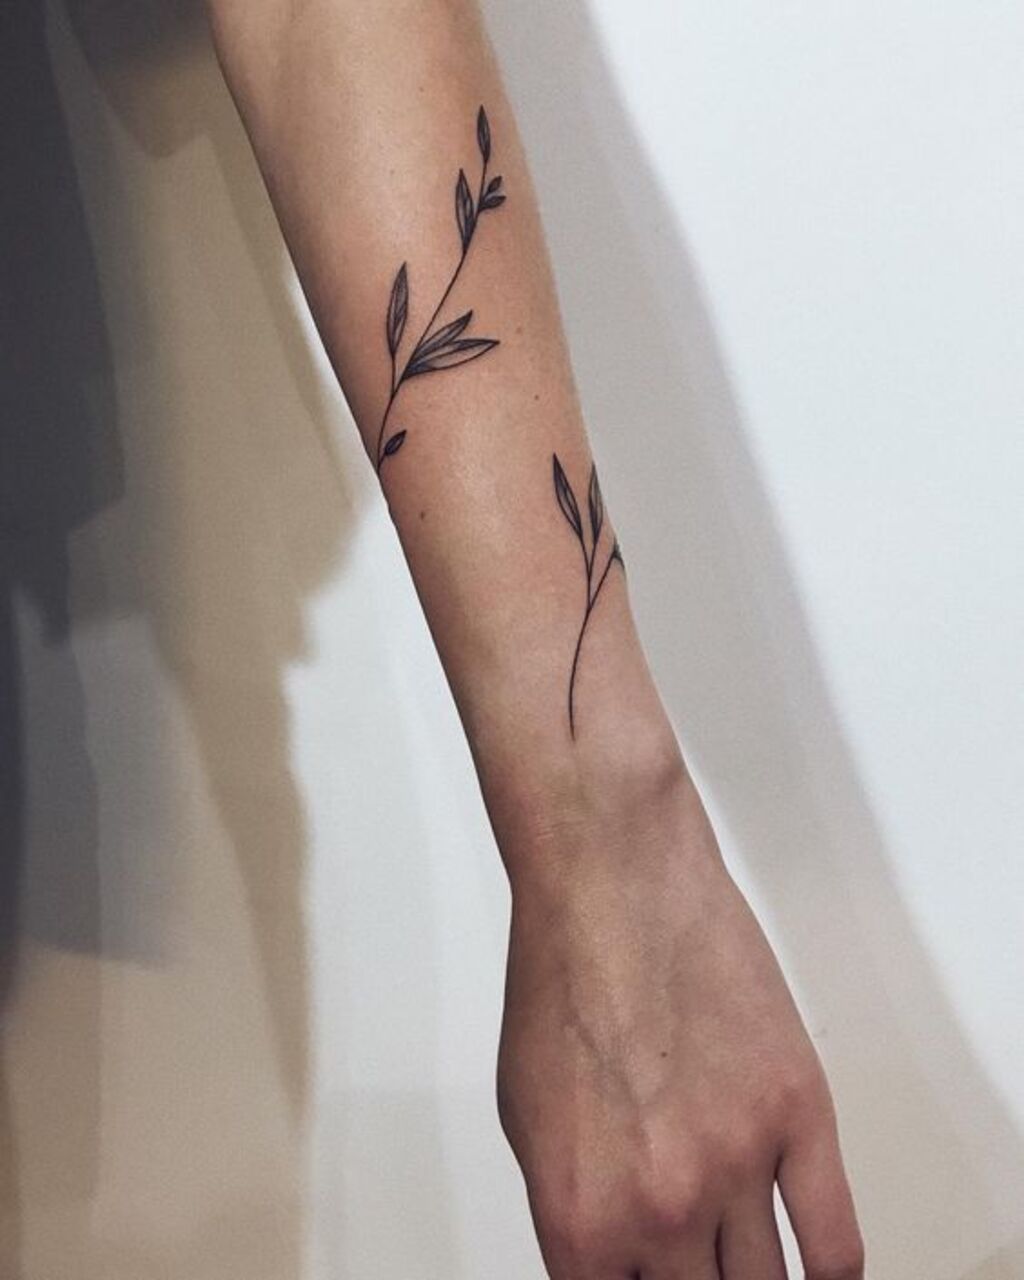 35+ Forearm Tattoos for Women with Cool & Creative Designs